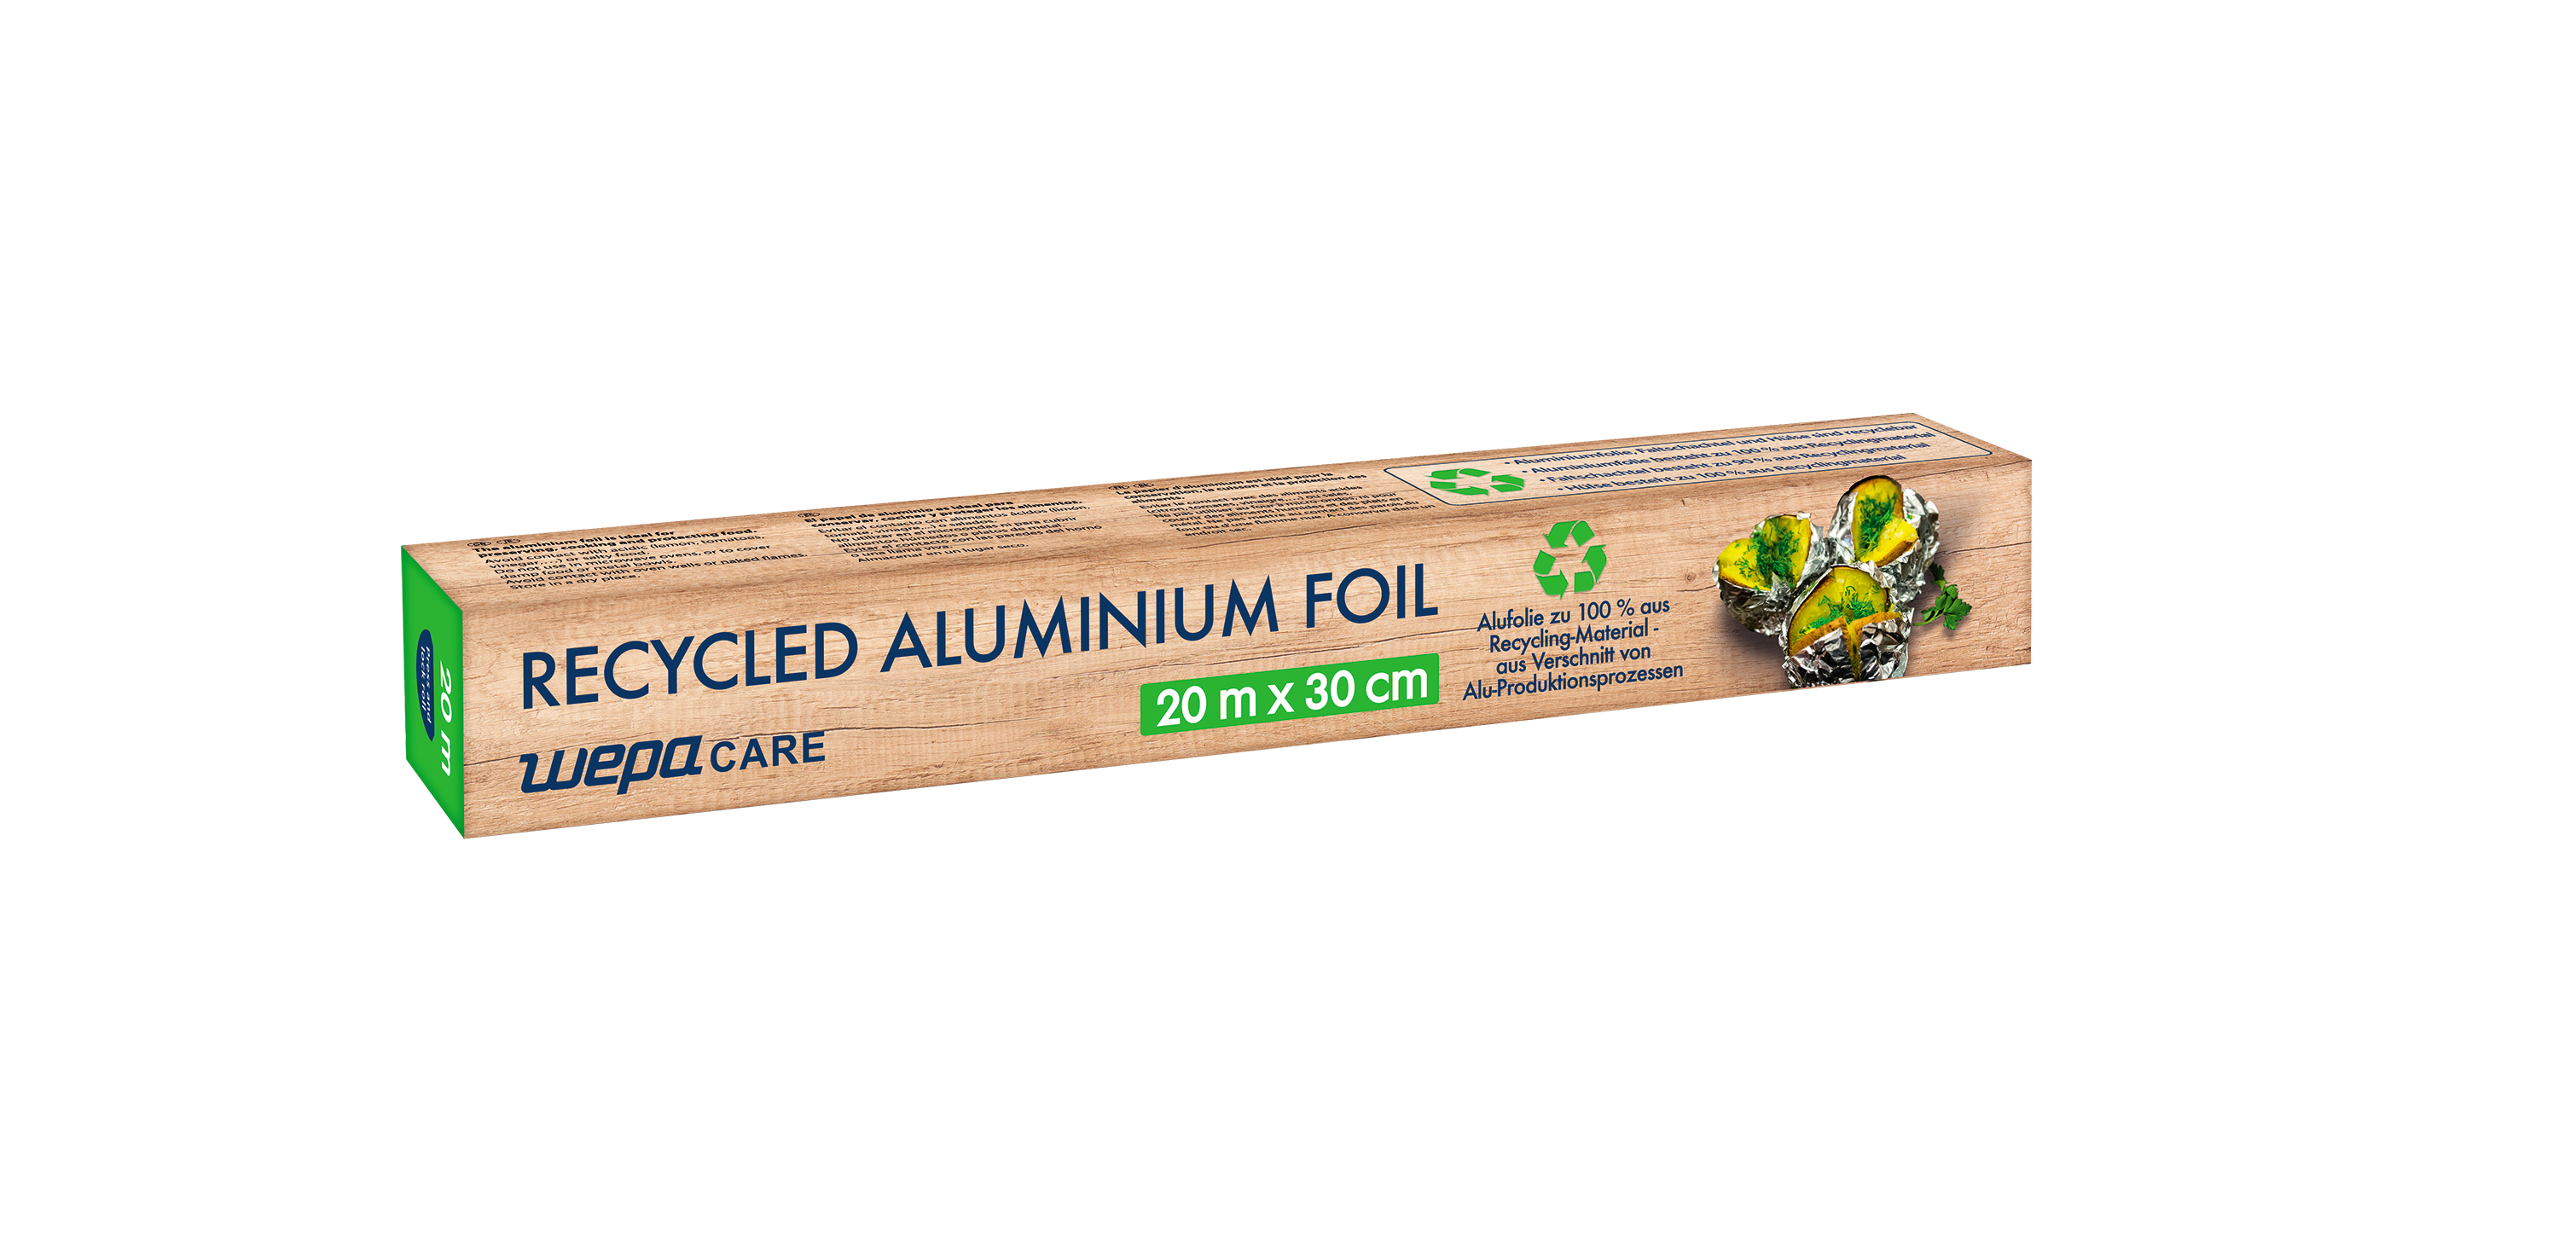 WEPA Care recycling Alufolie 20 Meter Rolle